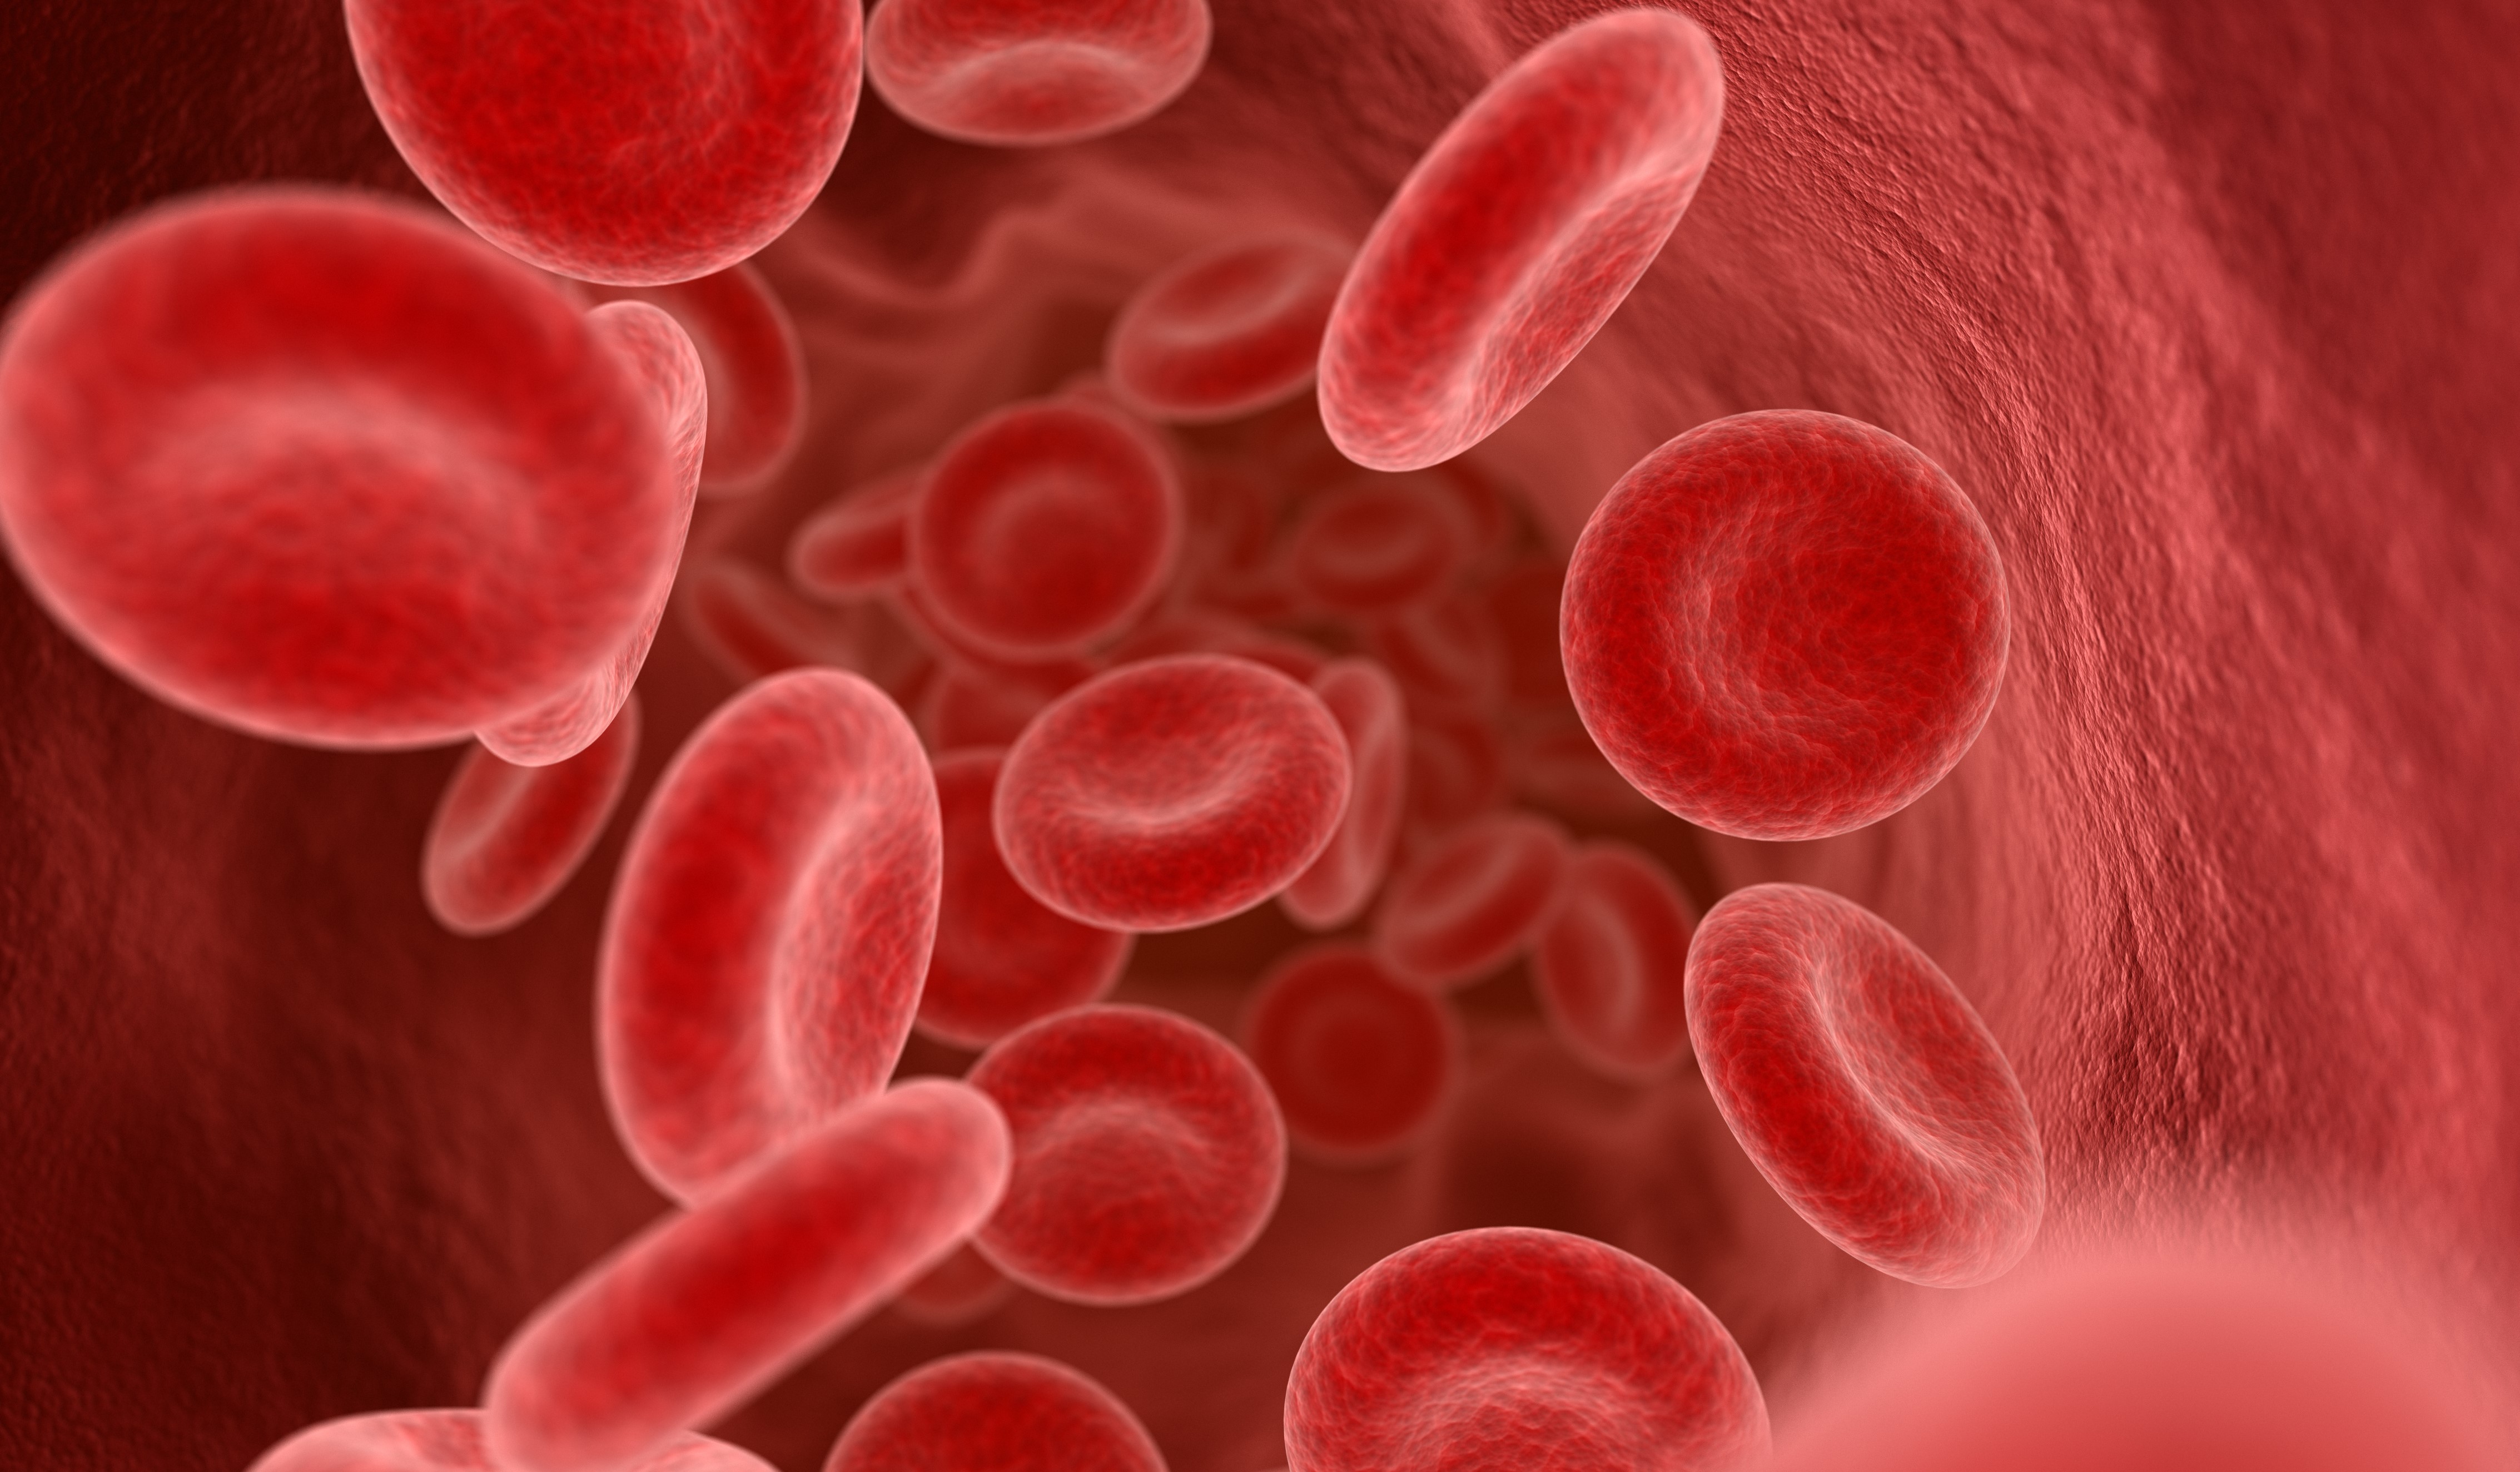 red blood cells picture